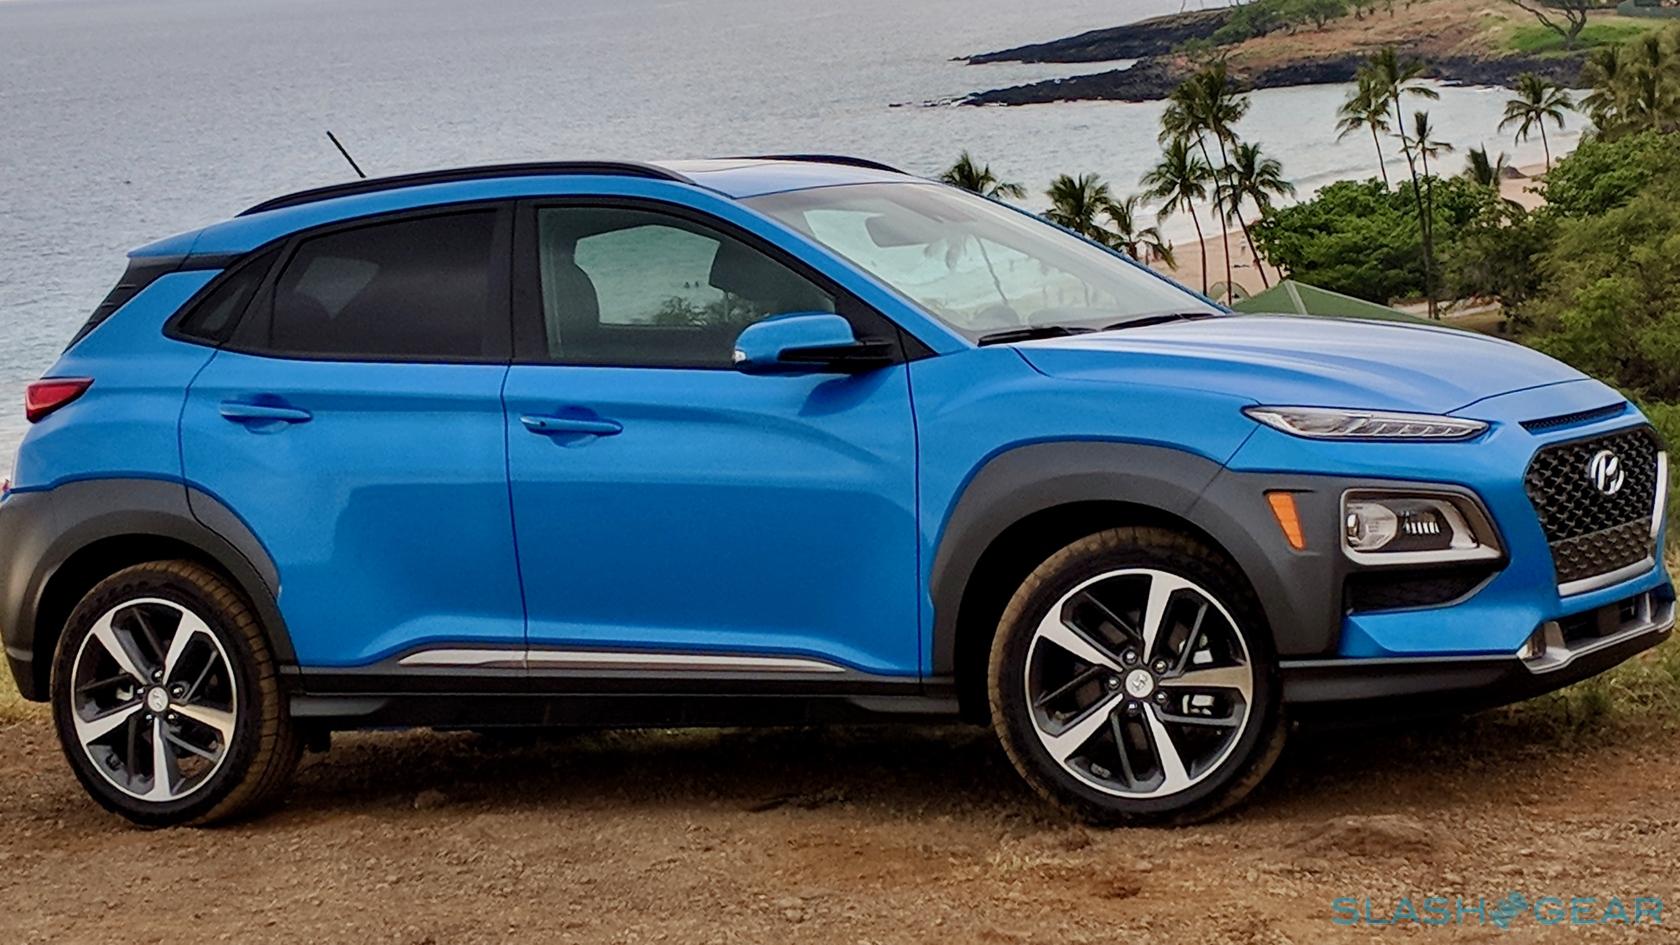 2018 Hyundai Kona Review A Subcompact Crossover Suv With An